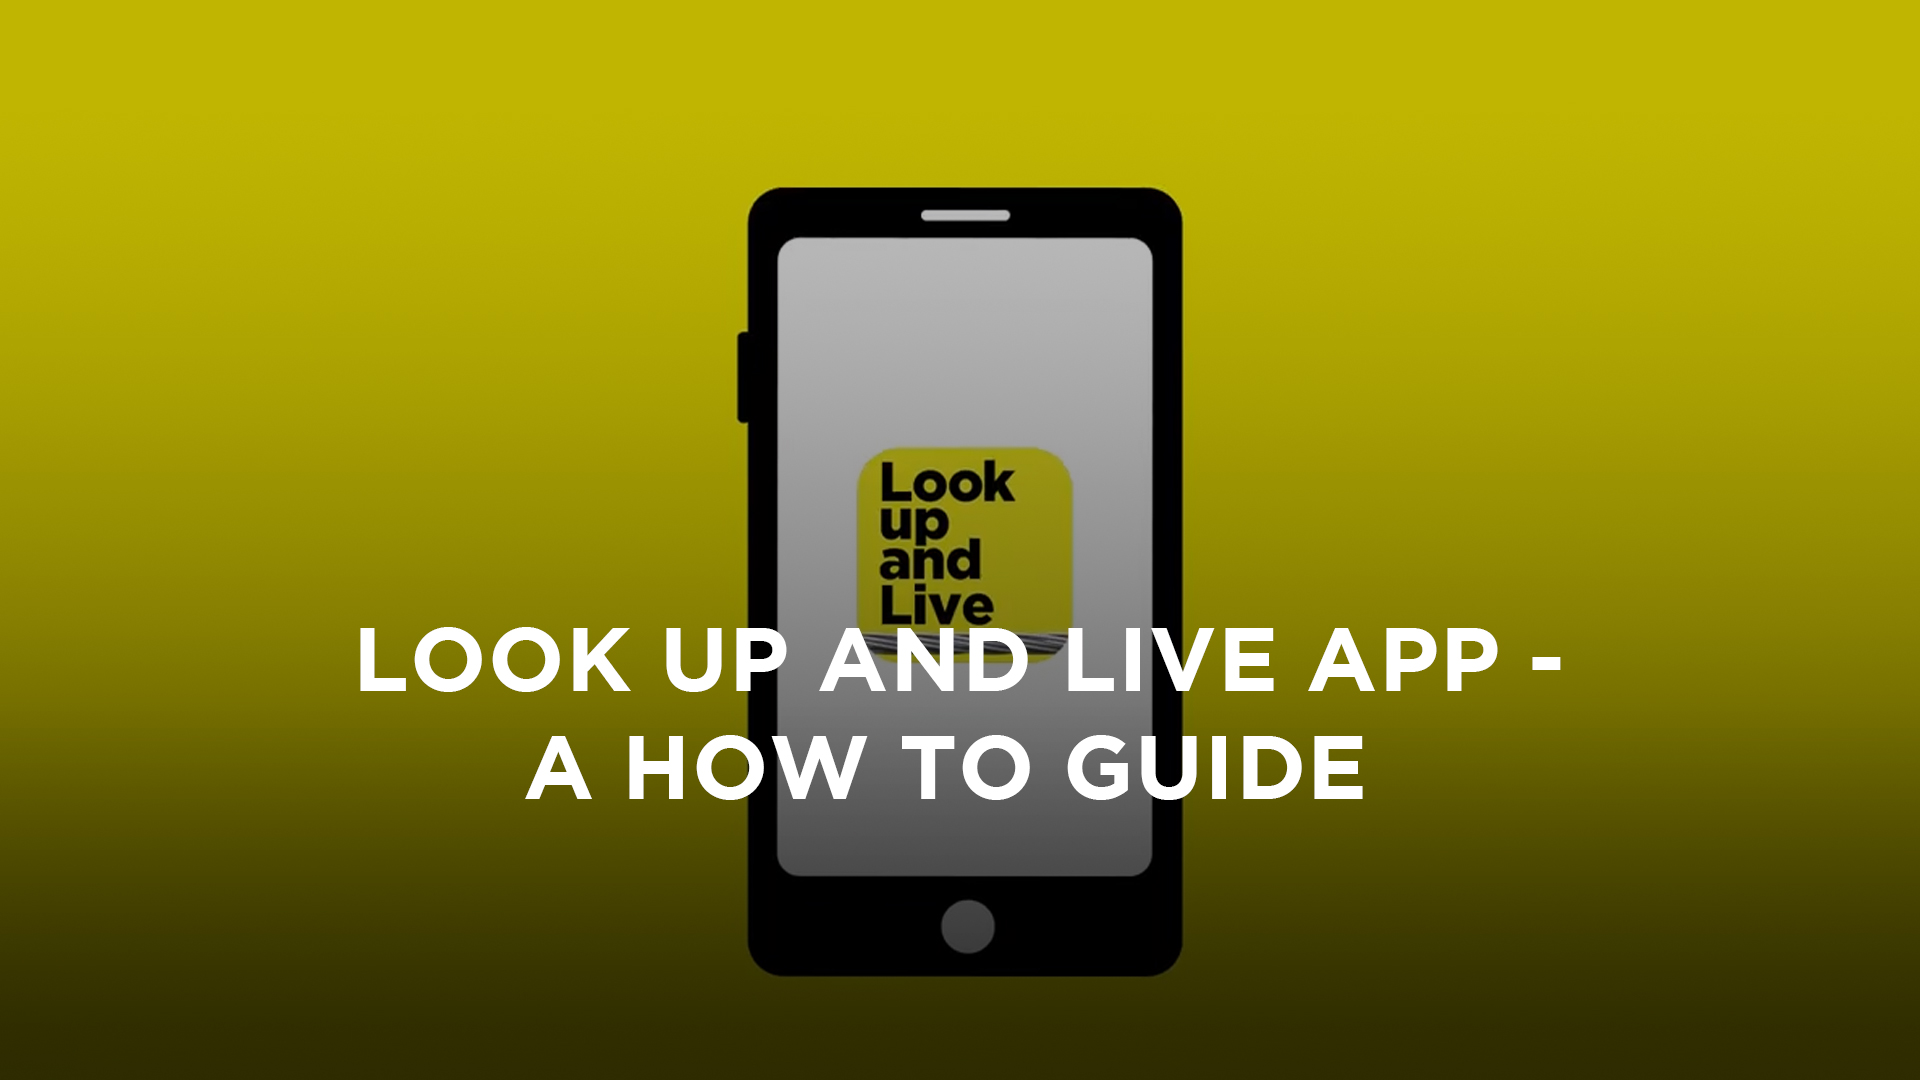 Mobile phone with the look up and live app on the screen and wording of Look up and Live app guide